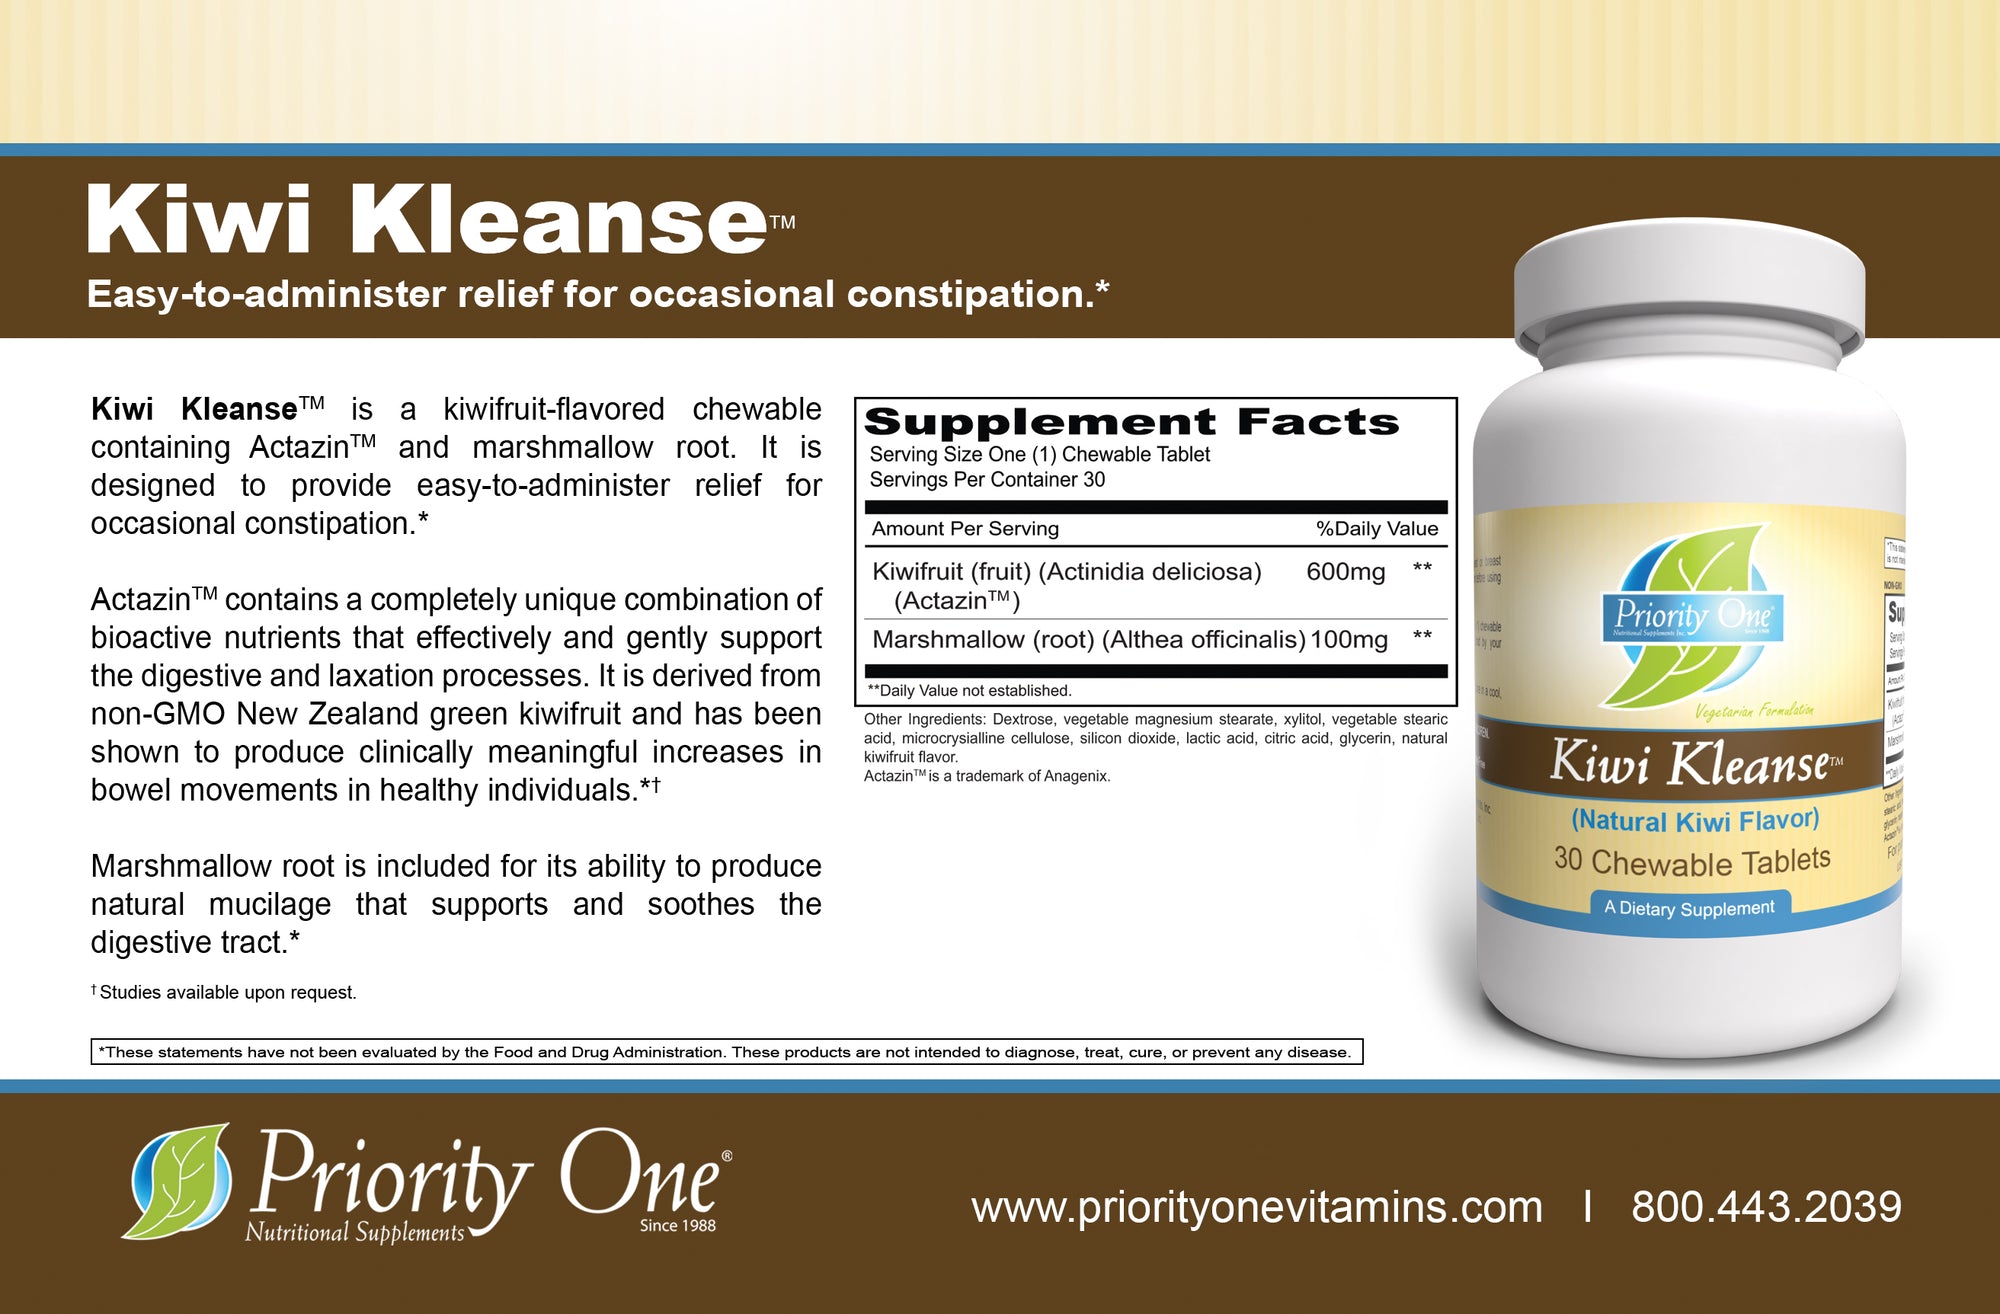 Kiwi Kleanse (30 Chewable Tablets) Kiwi Kleanse are chewable constipation tablets. They are easy to administer for occasional constipation relief.*